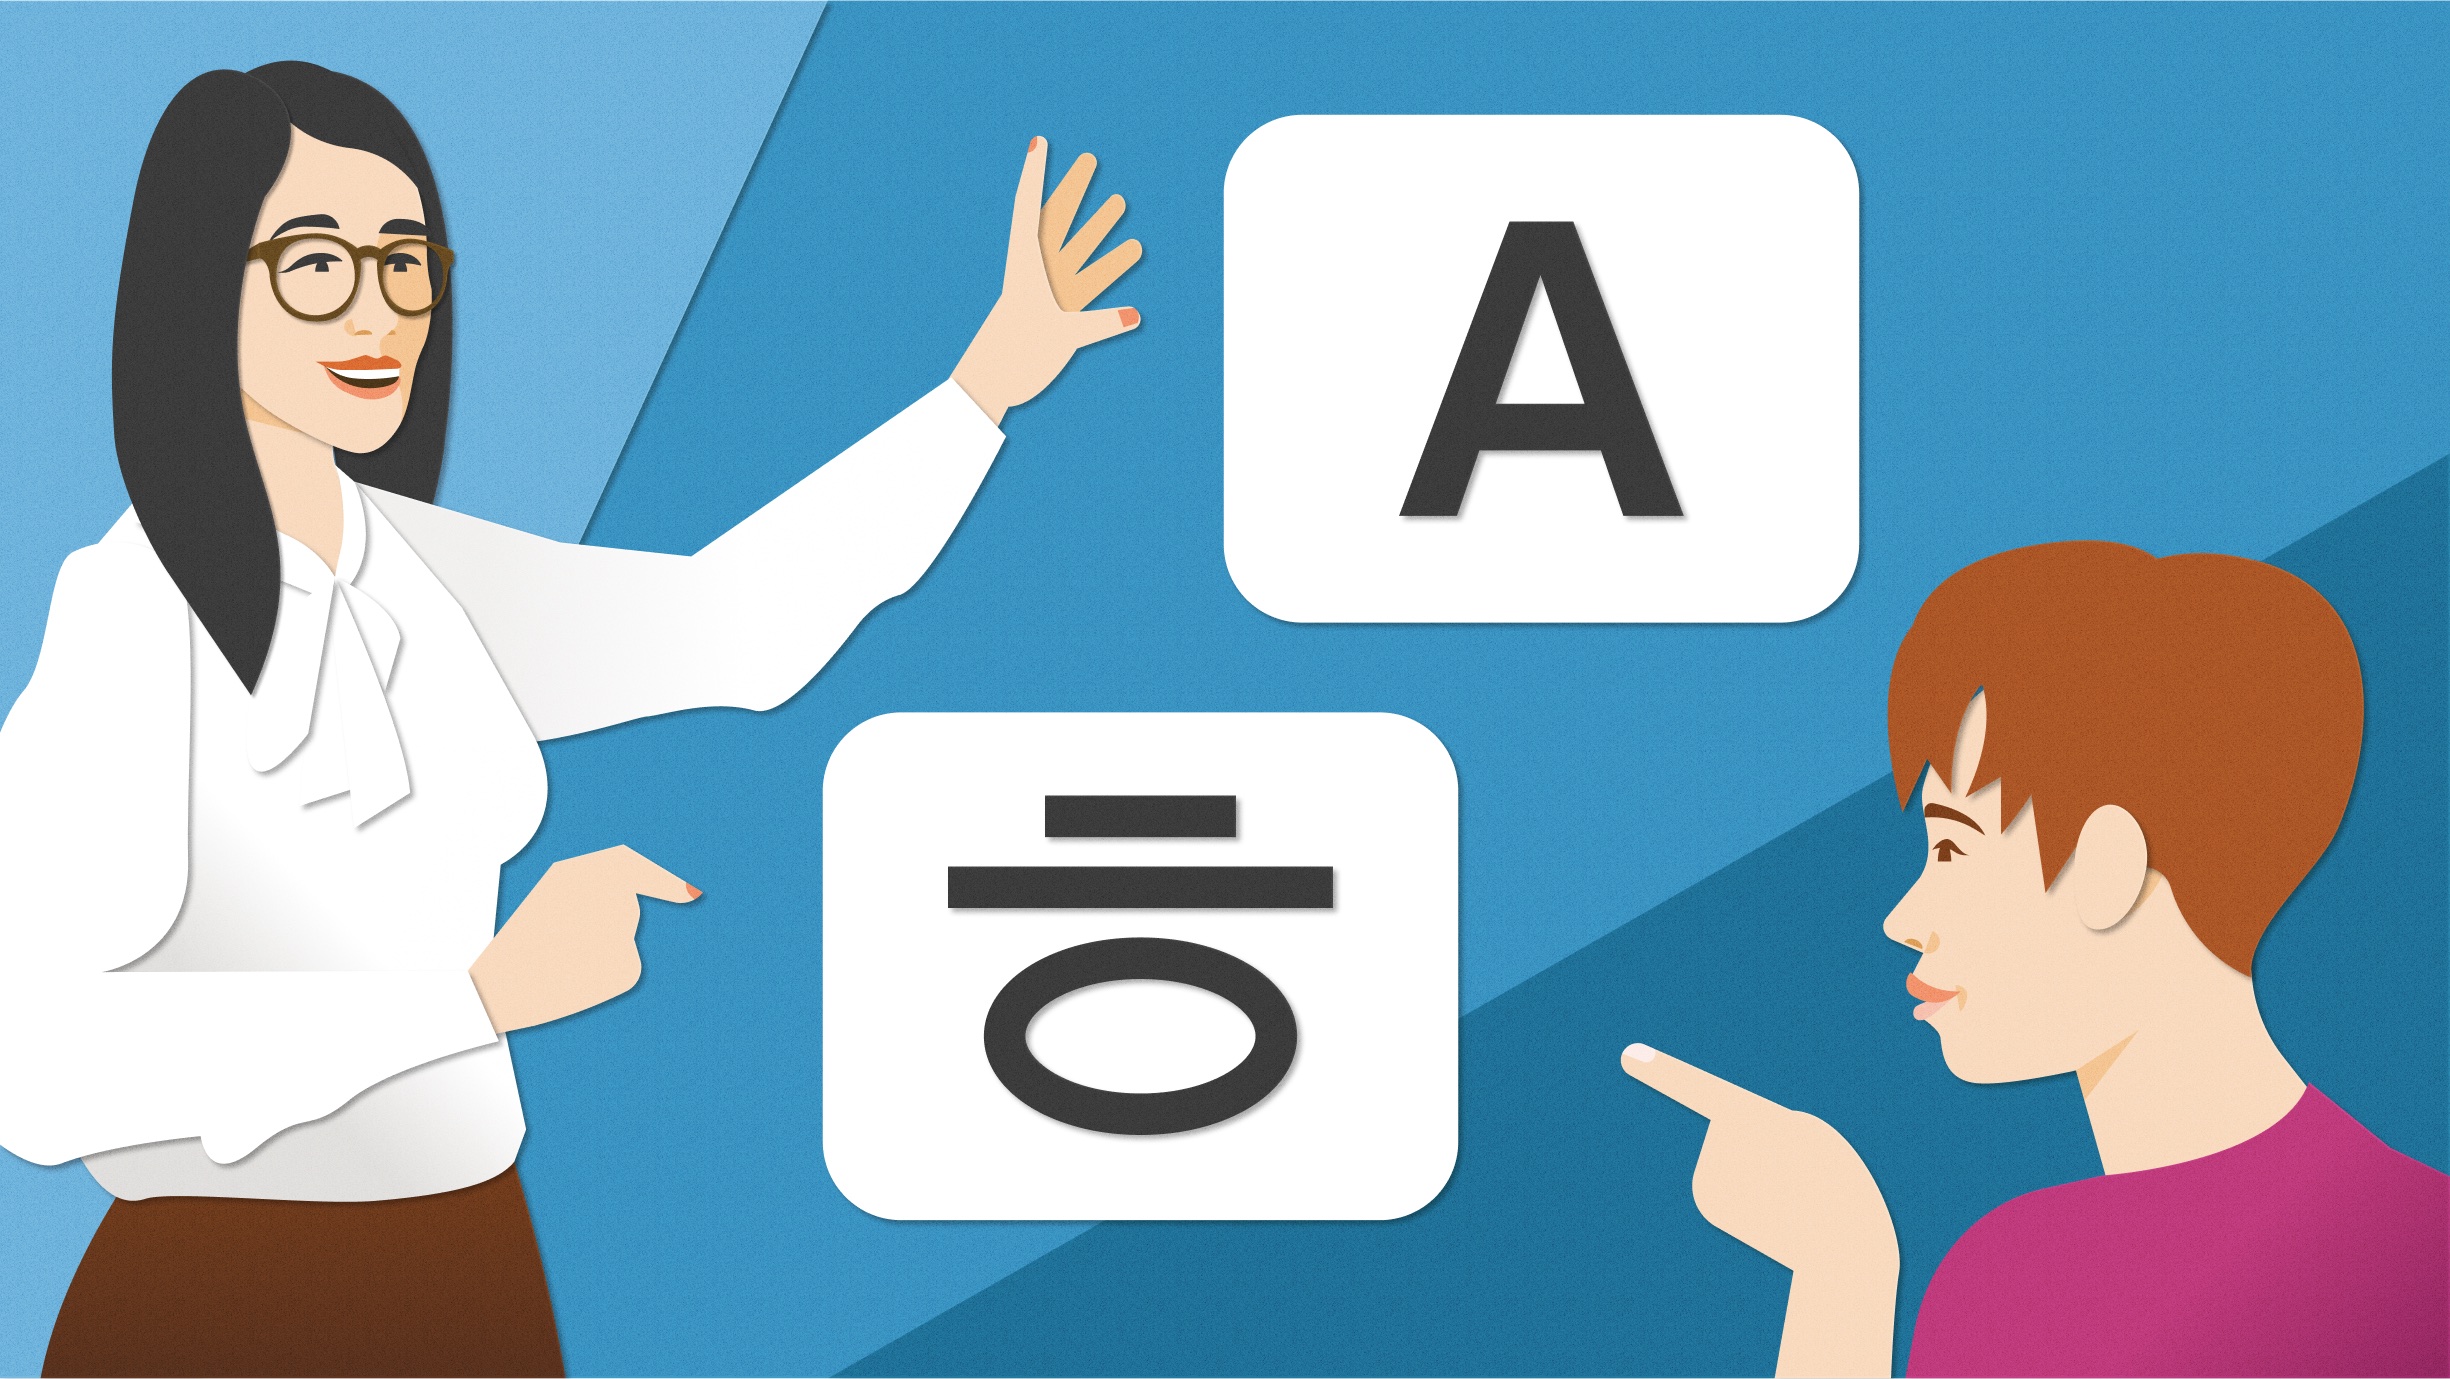 A teacher gestures toward the letter A and a Korean character, and a student pays attention and points